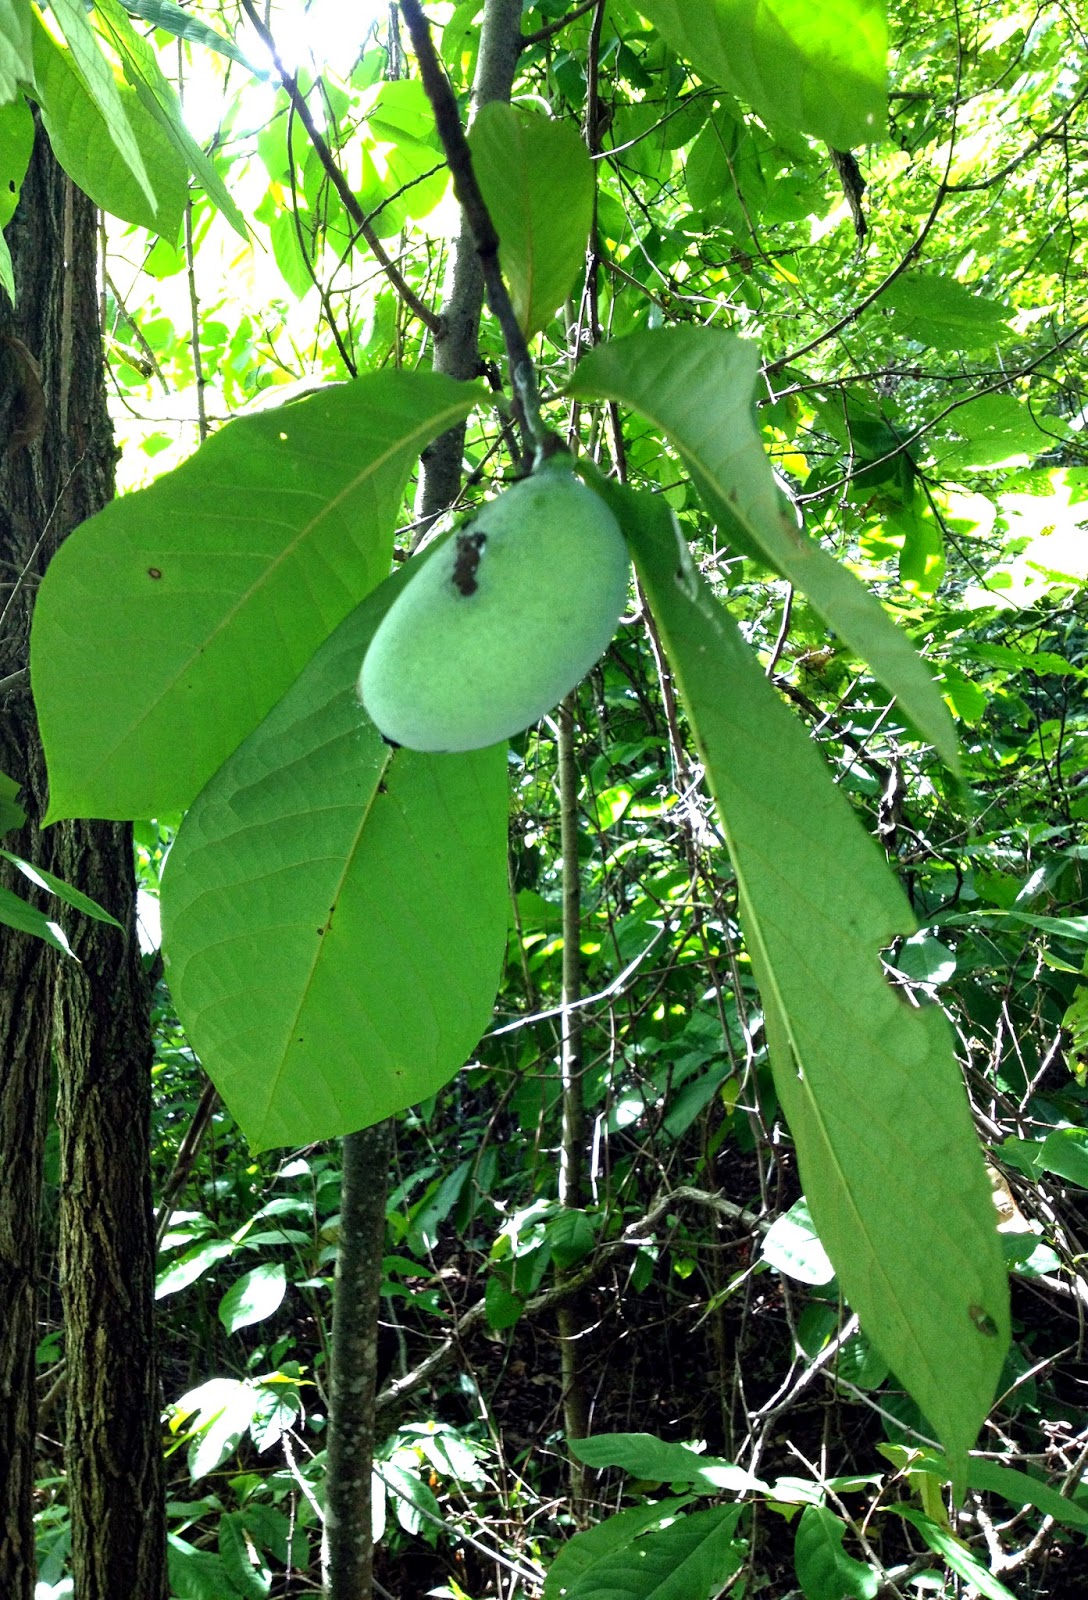 Paw Paw Fruite on Tree. Arkansas. Photo by Johnnie Chamberlin